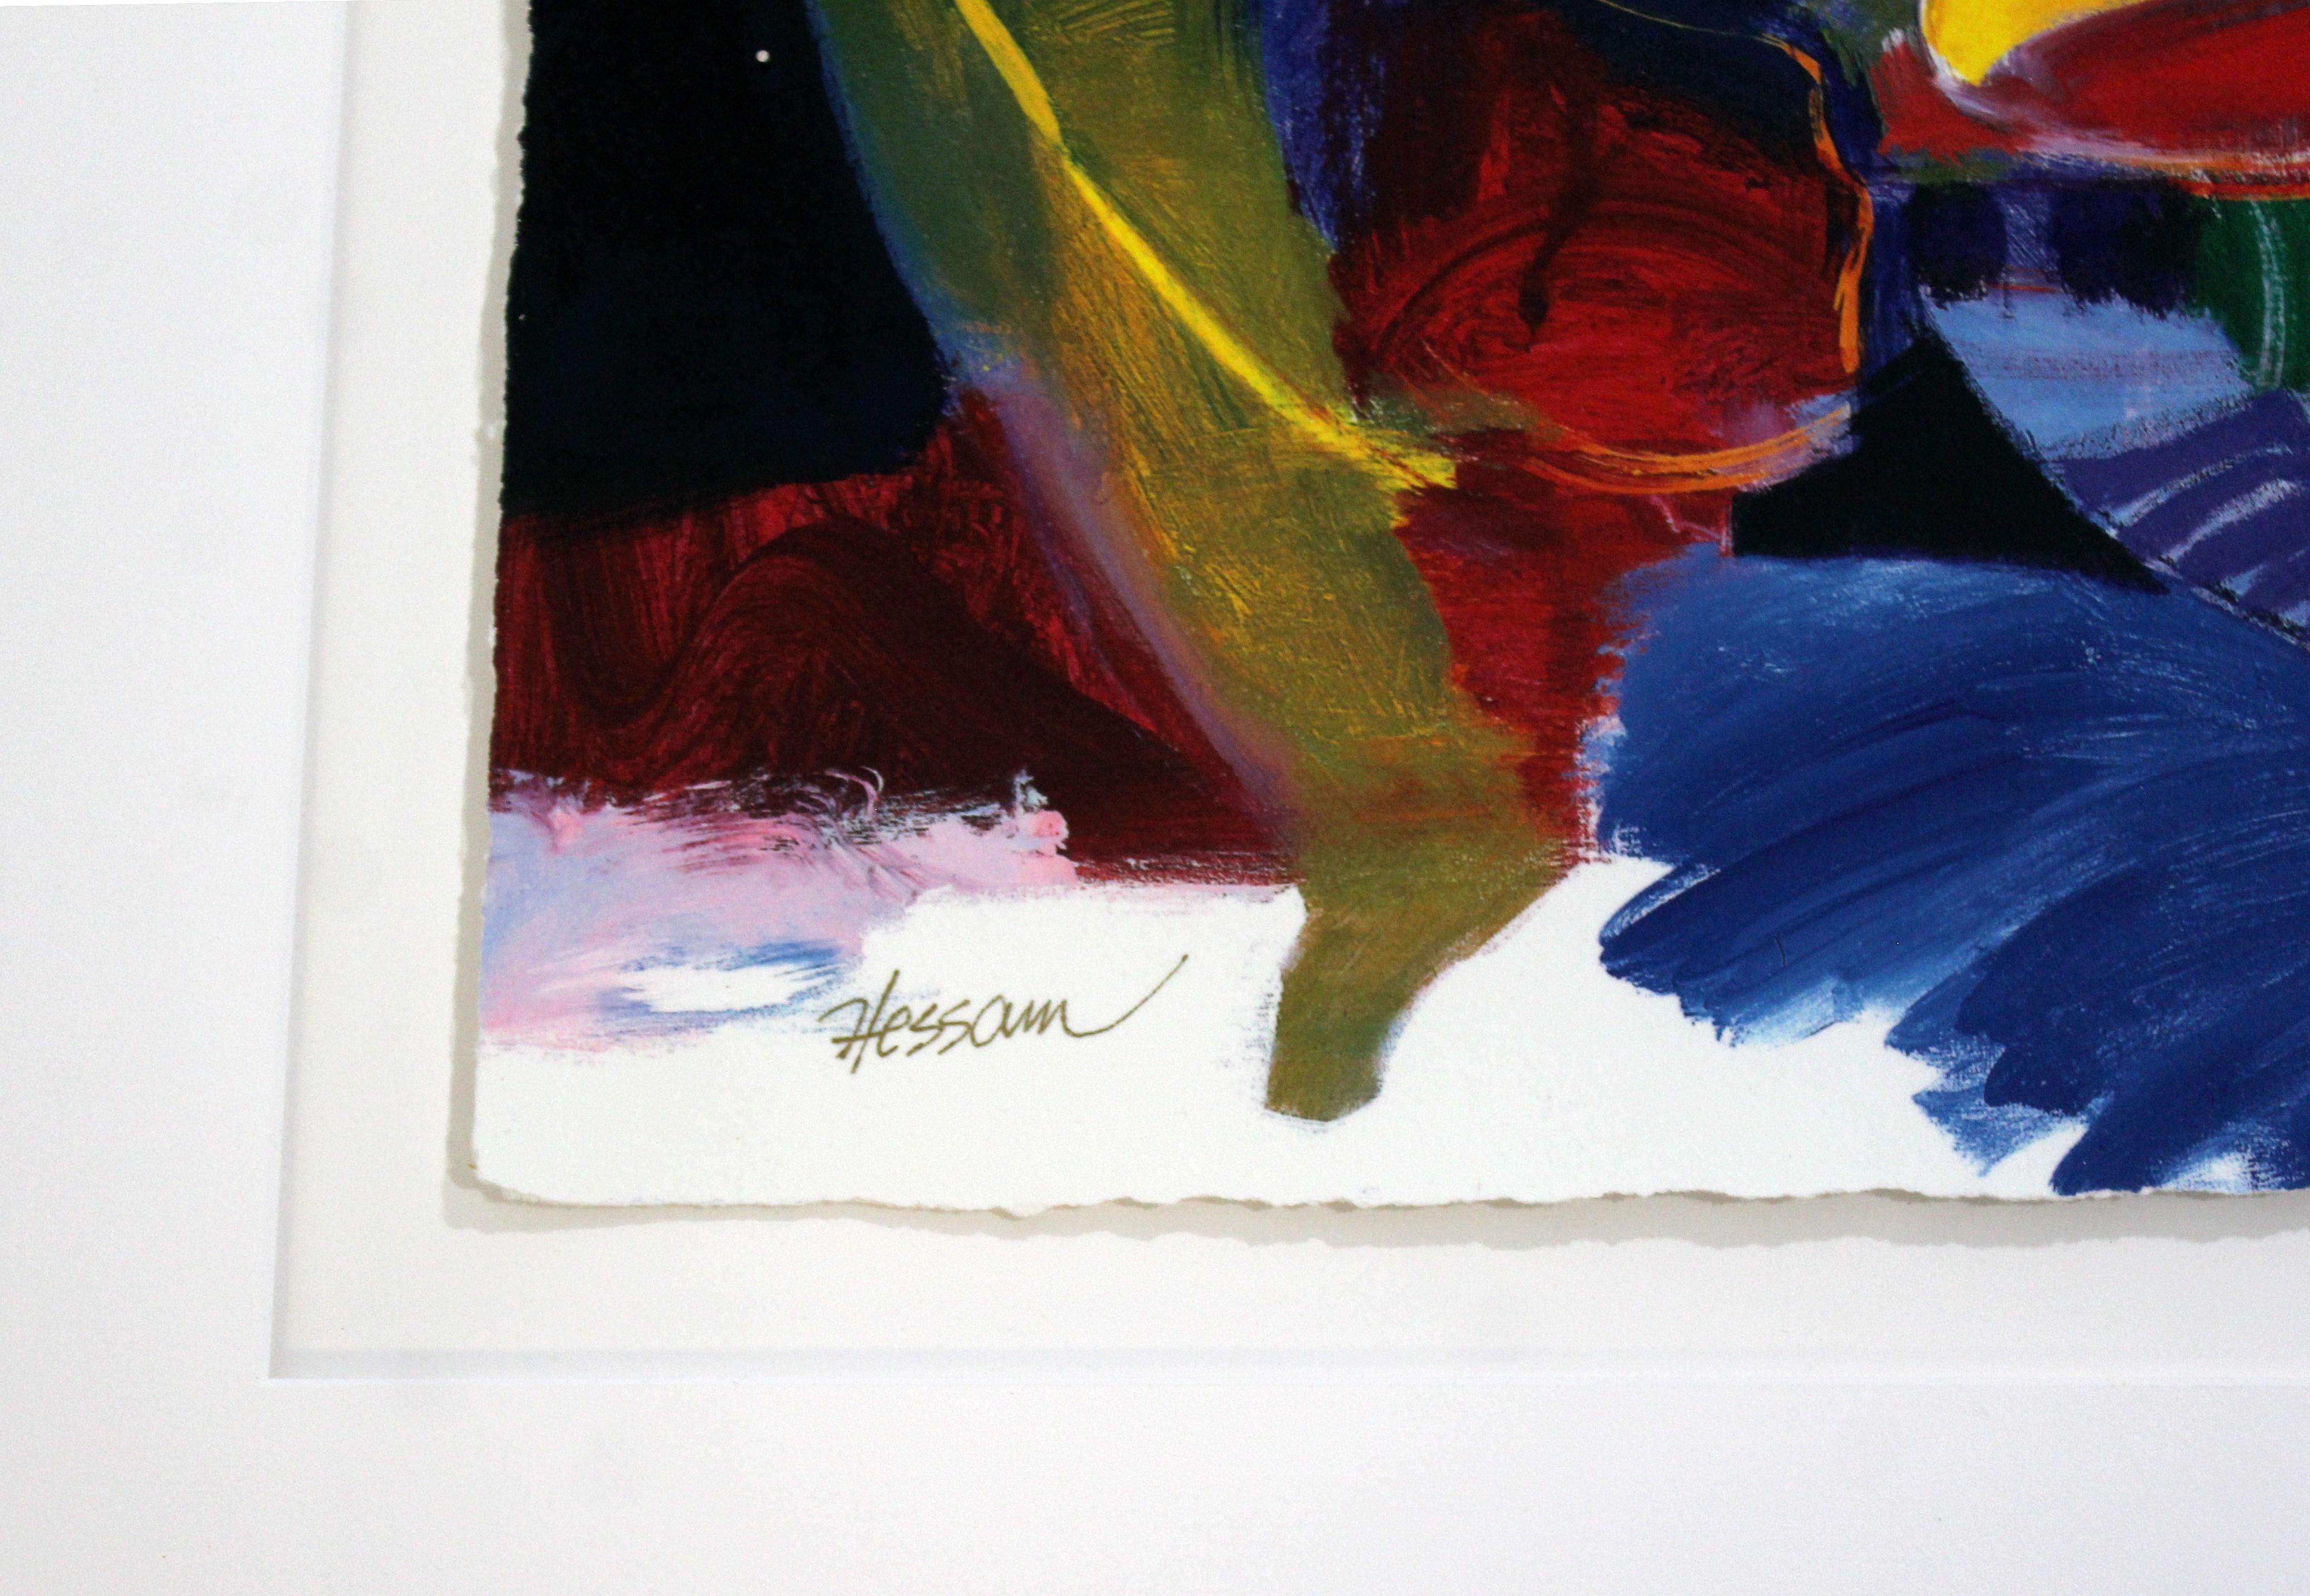 Contemporary Framed Serigraph Signed by Hessam Abrishami Romance 231/395 In Good Condition For Sale In Keego Harbor, MI